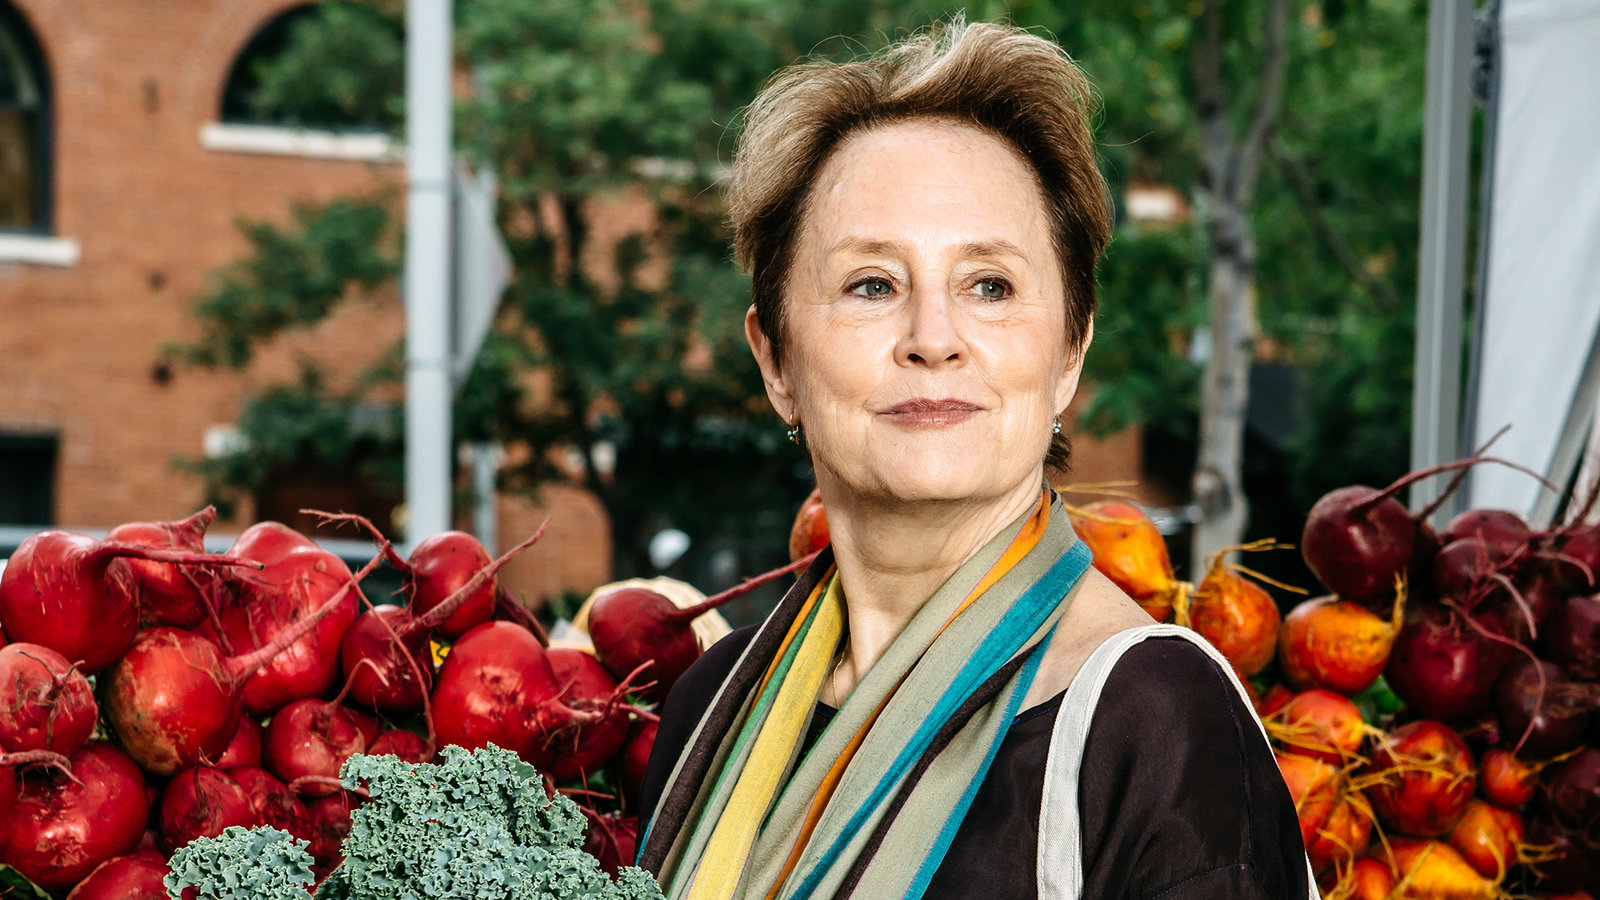 25 Famous Female Chefs From Around The World